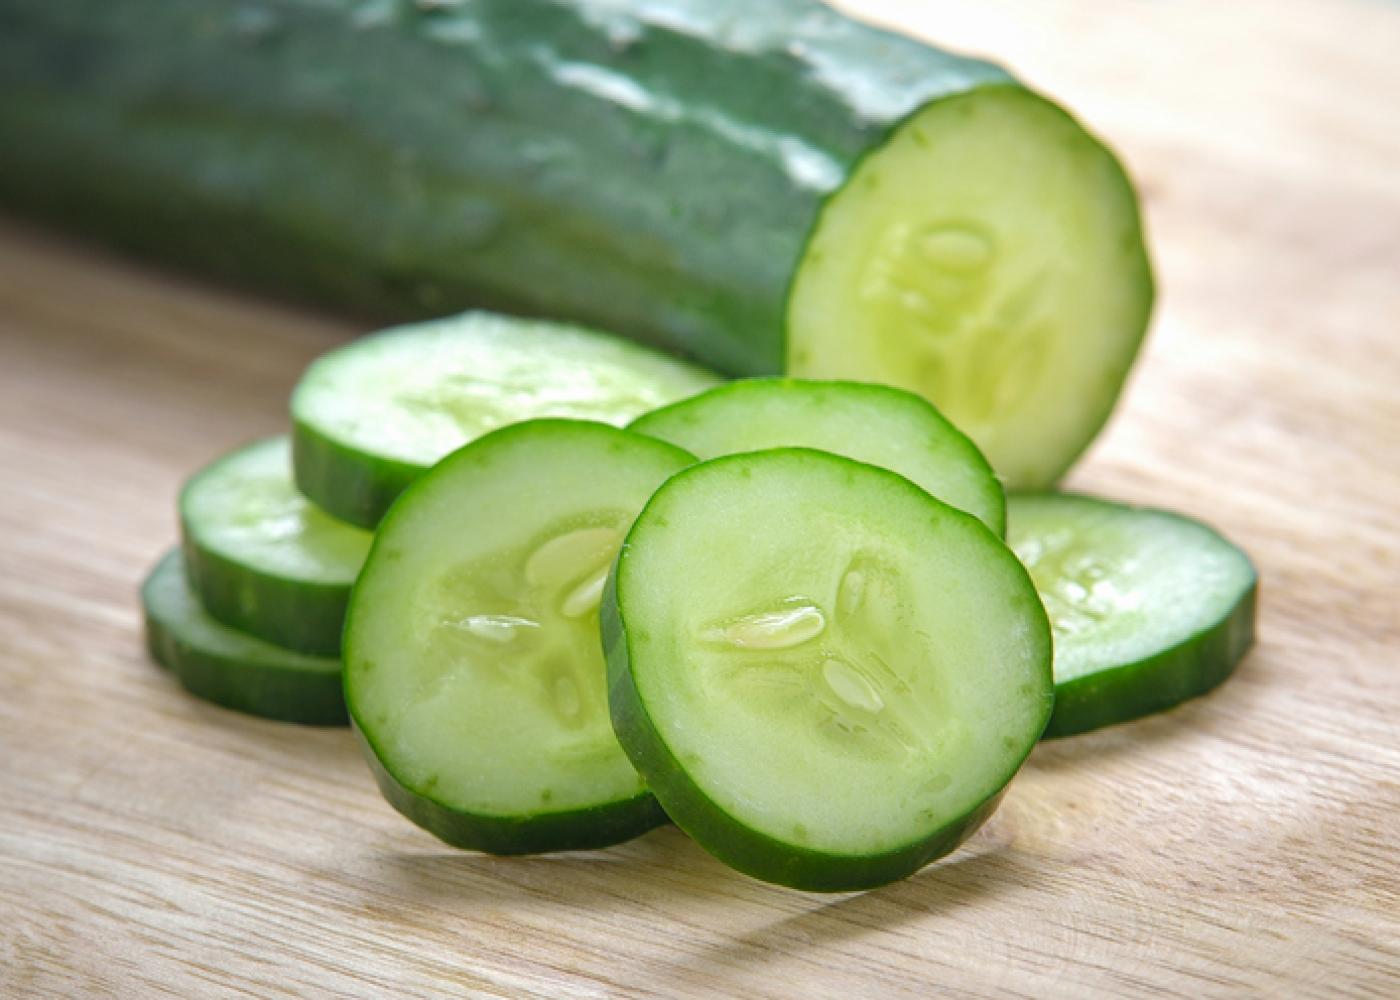 What Are The Health Benefits Of Eating Cucumber At Night?